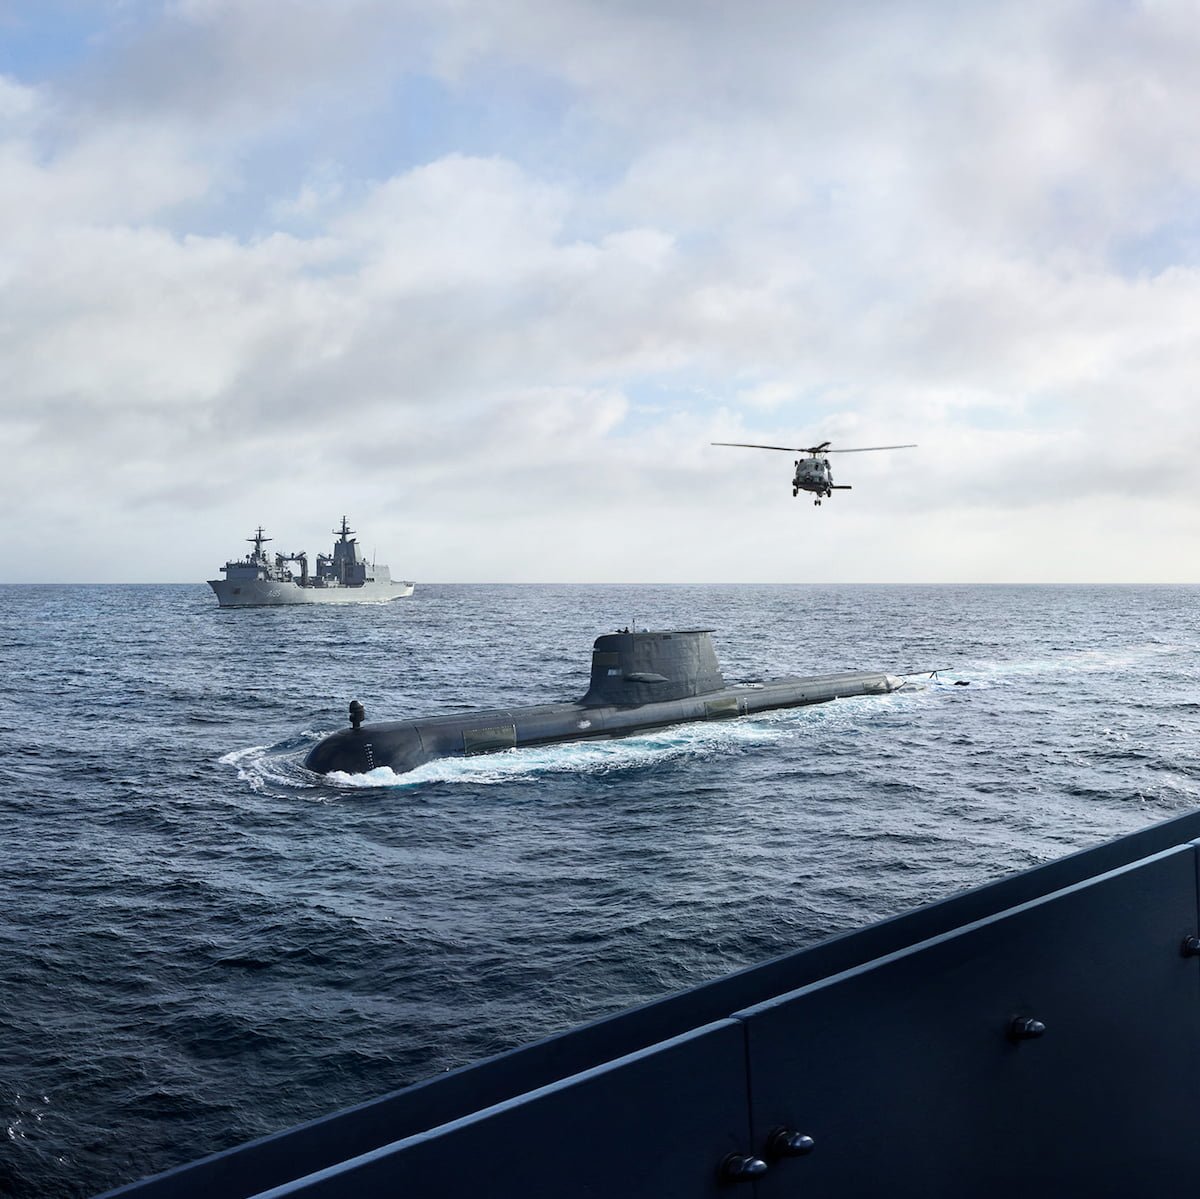 Submarine, surface ship and helicopter travel as one.